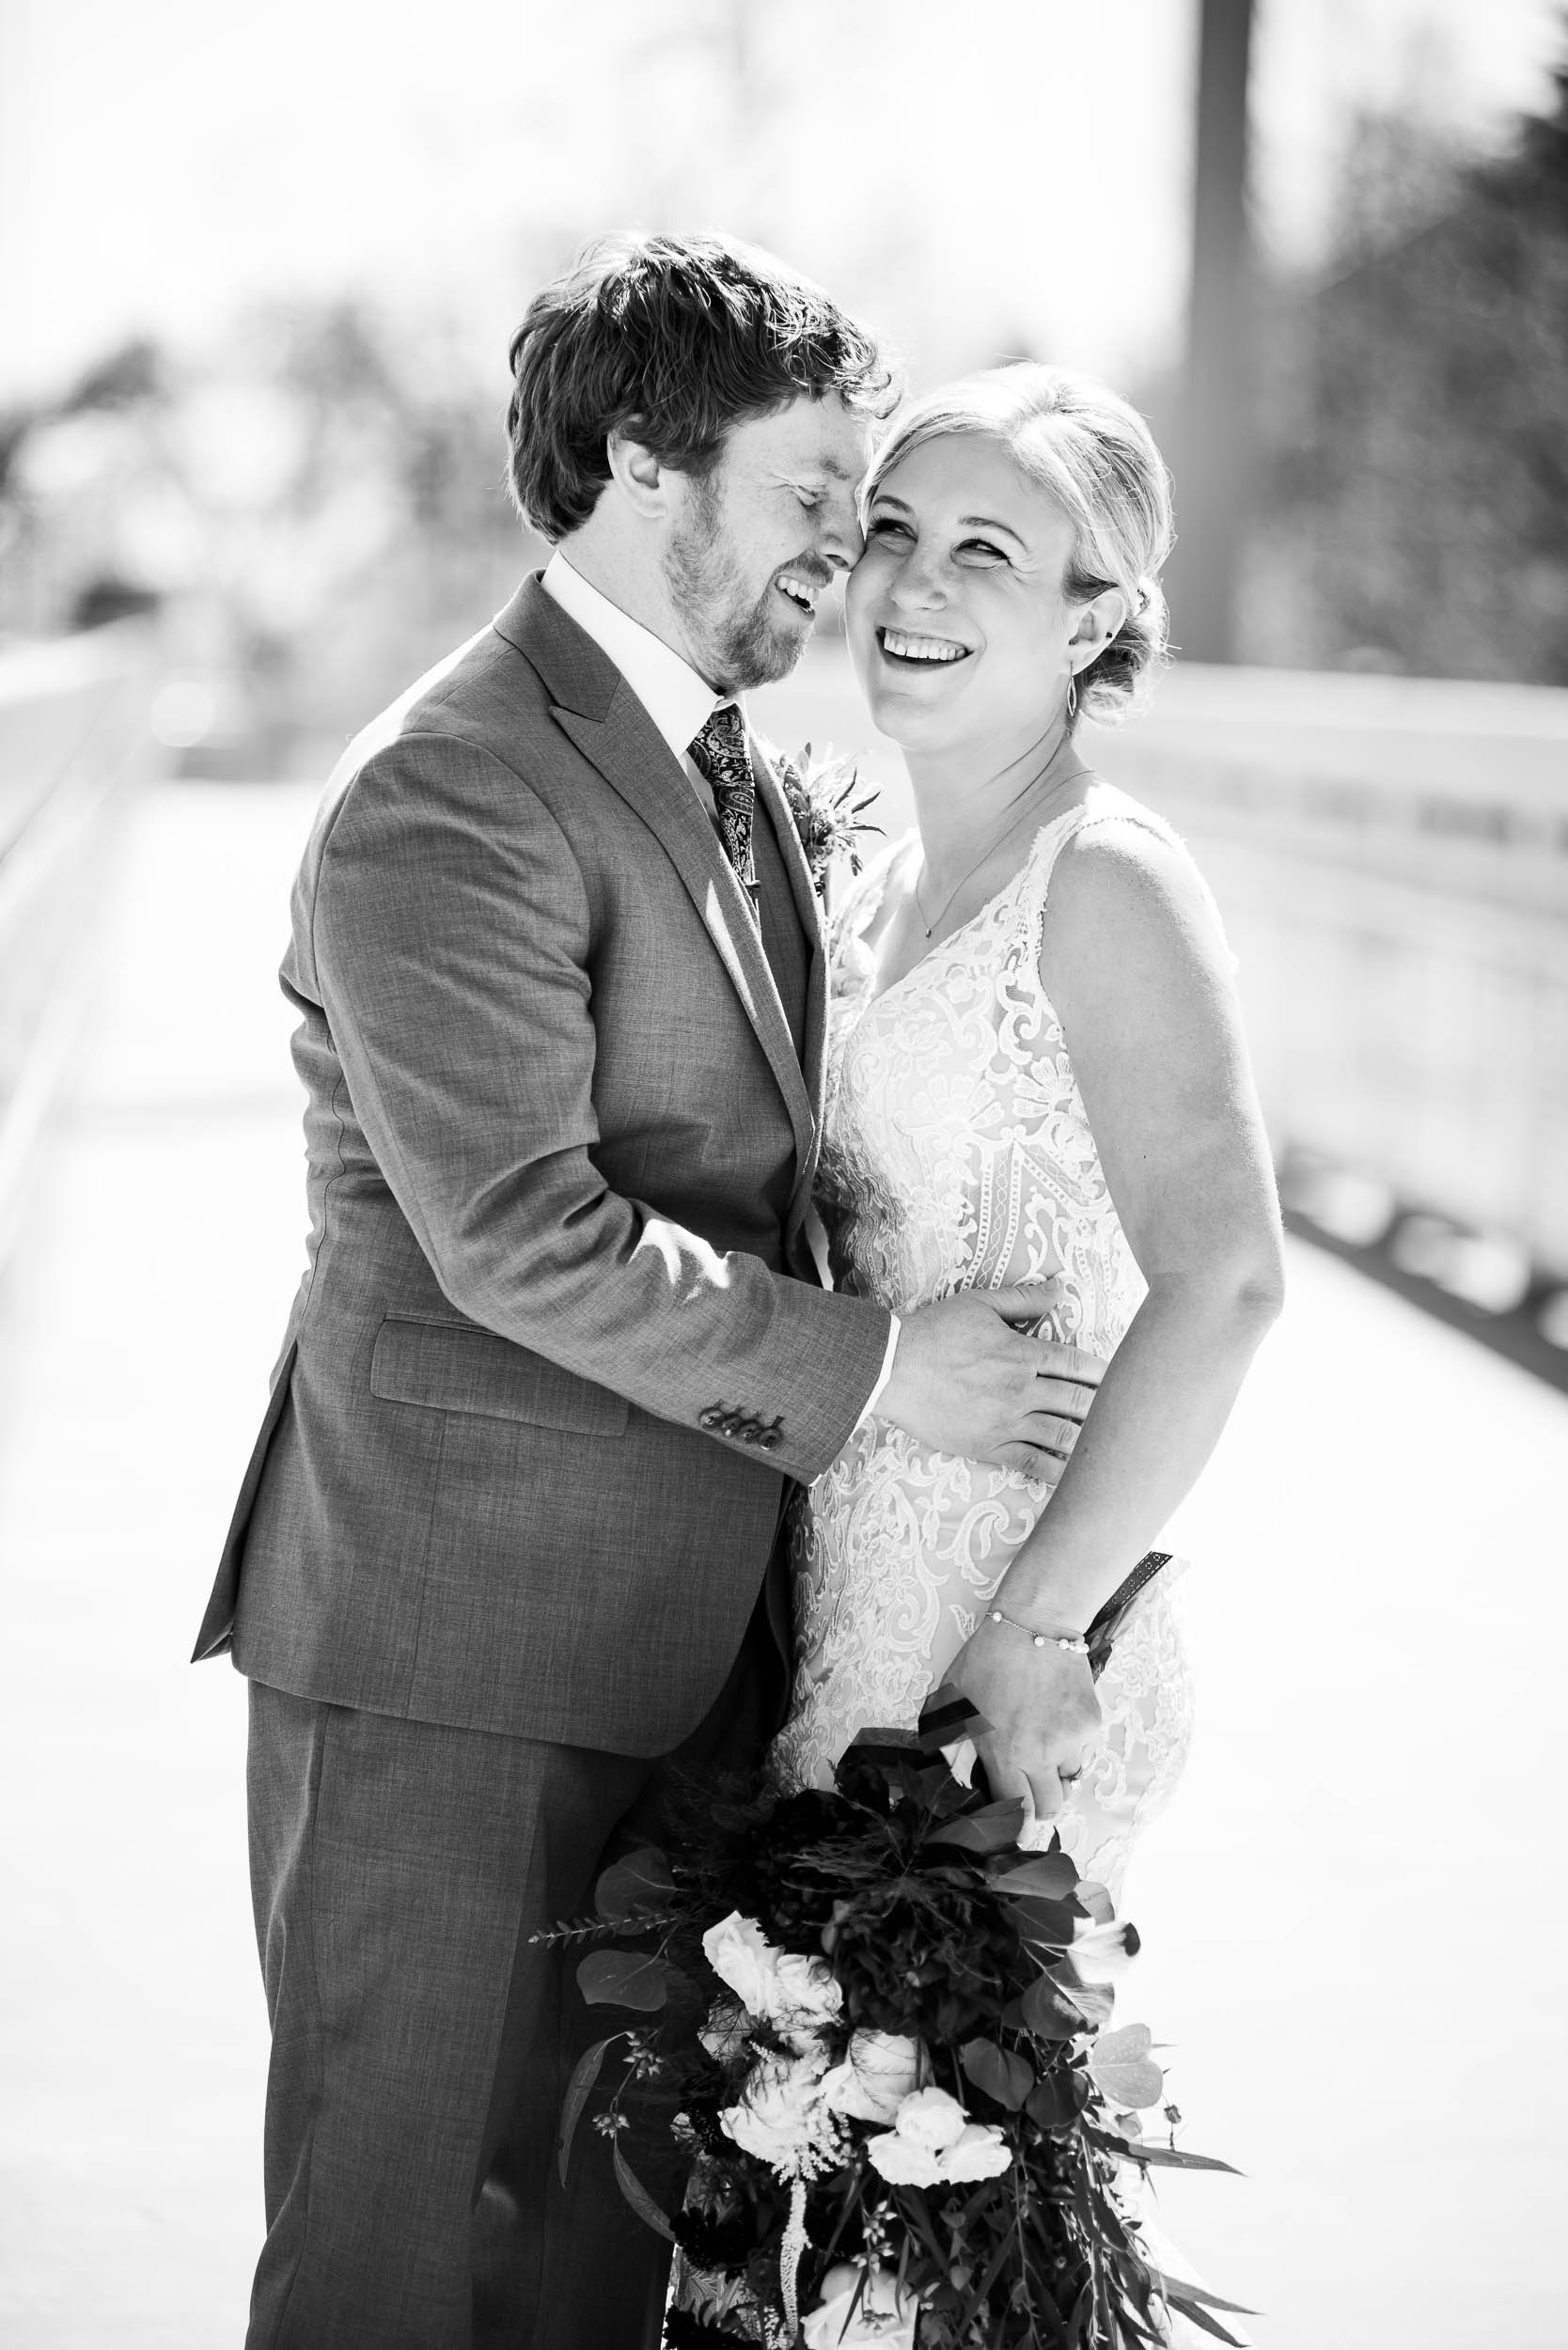 Black and white wedding photos: Modern industrial Chicago wedding inside Prairie Street Brewhouse captured by J. Brown Photography. Find more wedding ideas at jbrownphotography.com!